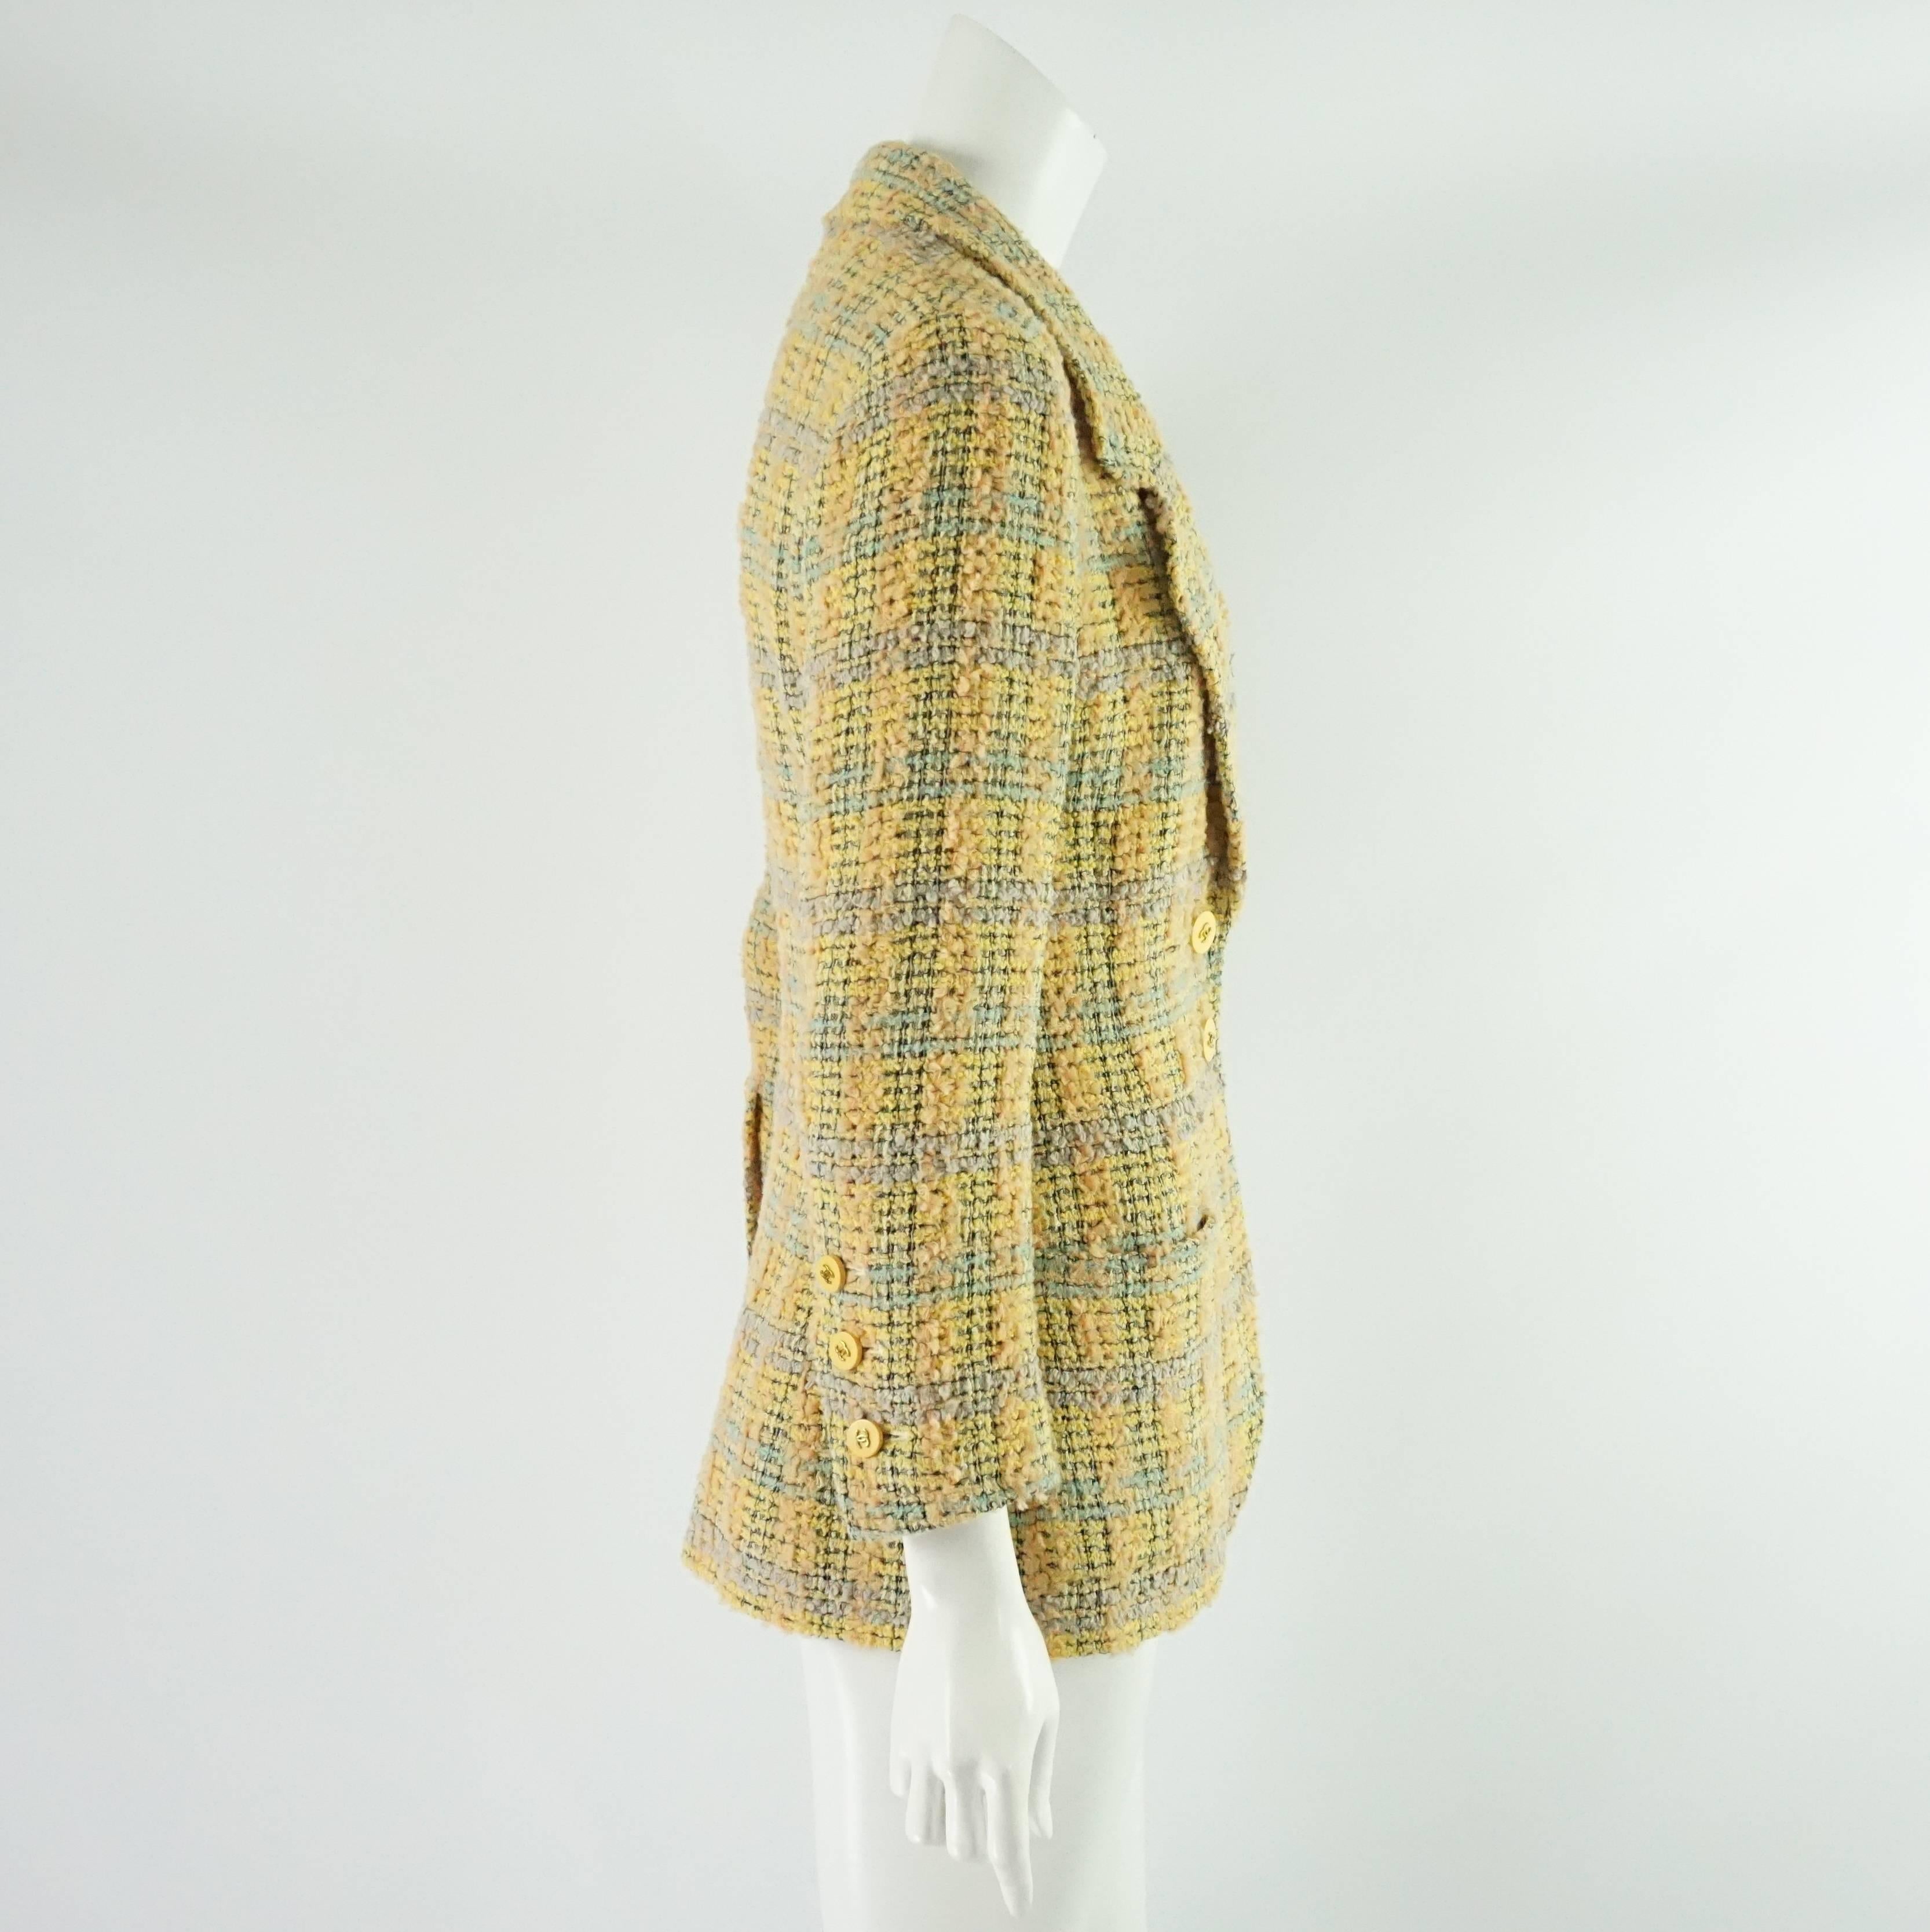 This beautiful Chanel jacket is yellow and peach plaid tweed in a wool blend. The buttons are a yellow enamel with gold CC's in the center. The front of the piece has 3 pockets and 2 buttons. The jacket is in excellent condition with light wear.